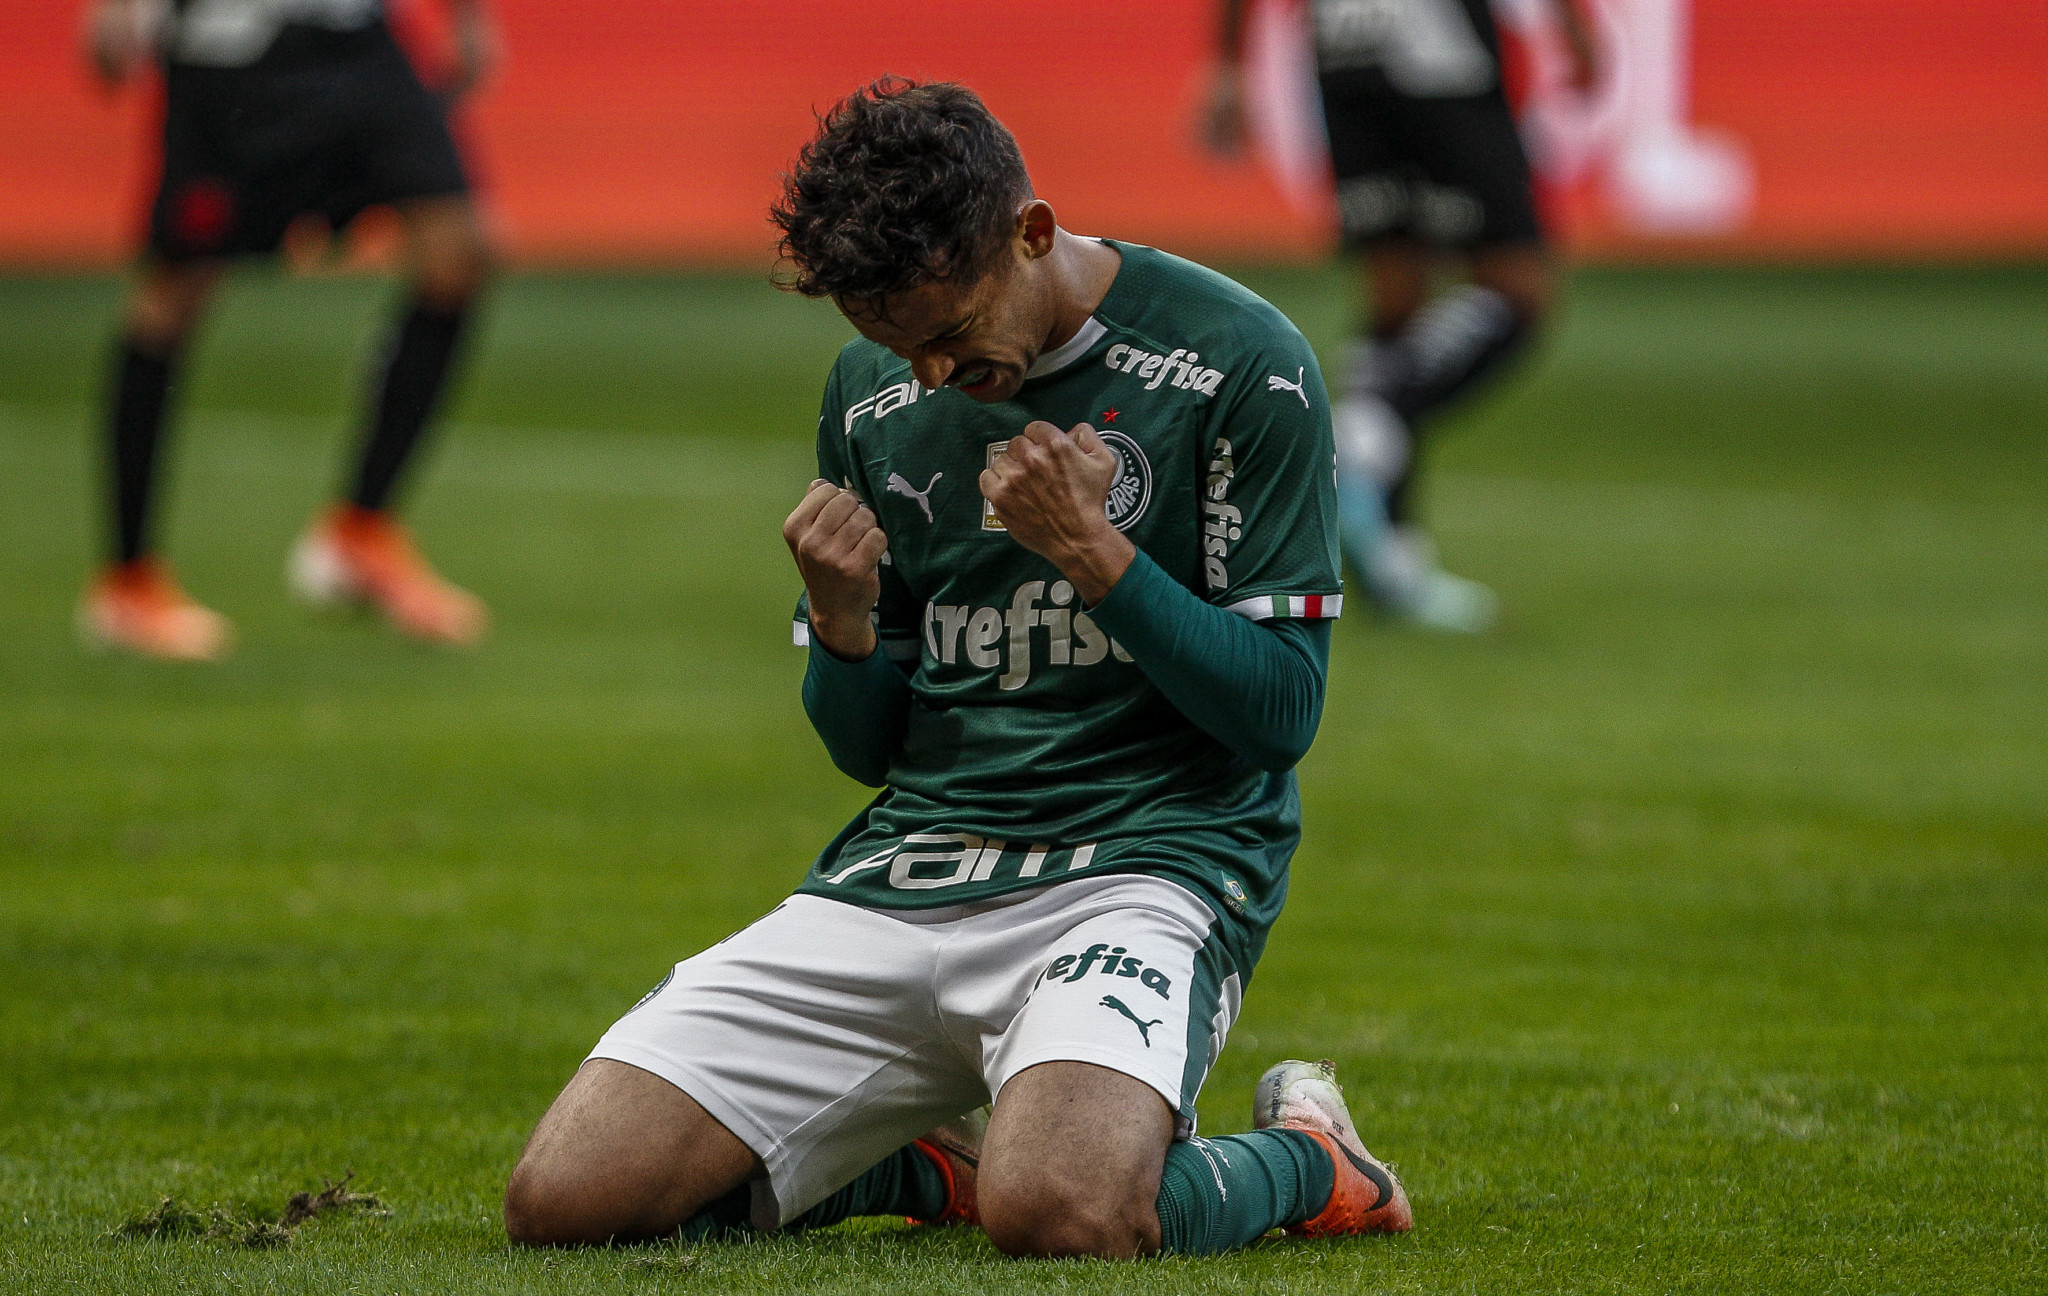 SAO PAULO, BRAZIL - JULY 27: Gustavo Scarpa of Palmeiras celebrates after scoring the first goal of his team during a match between Palmeiras and Vasco for the Brasileirao Series A 2019 at Allianz Parque on July 27, 2019 in Sao Paulo, Brazil. (Photo by Miguel Schincariol/Getty Images)